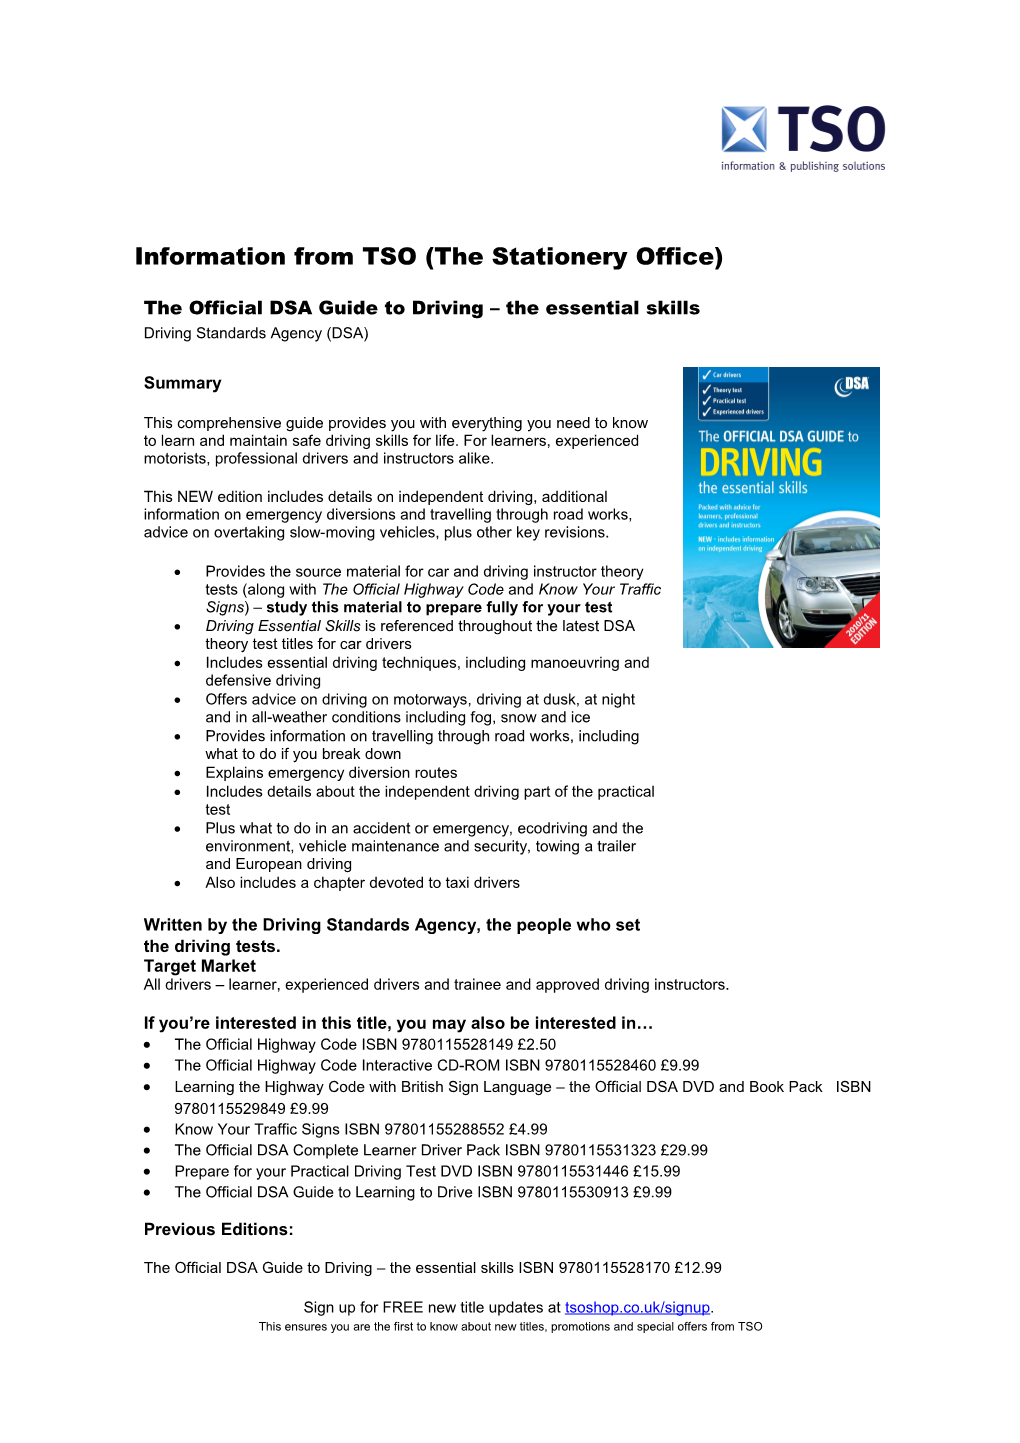 Includes Essential Driving Techniques, Including Manoeuvring and Defensive Driving